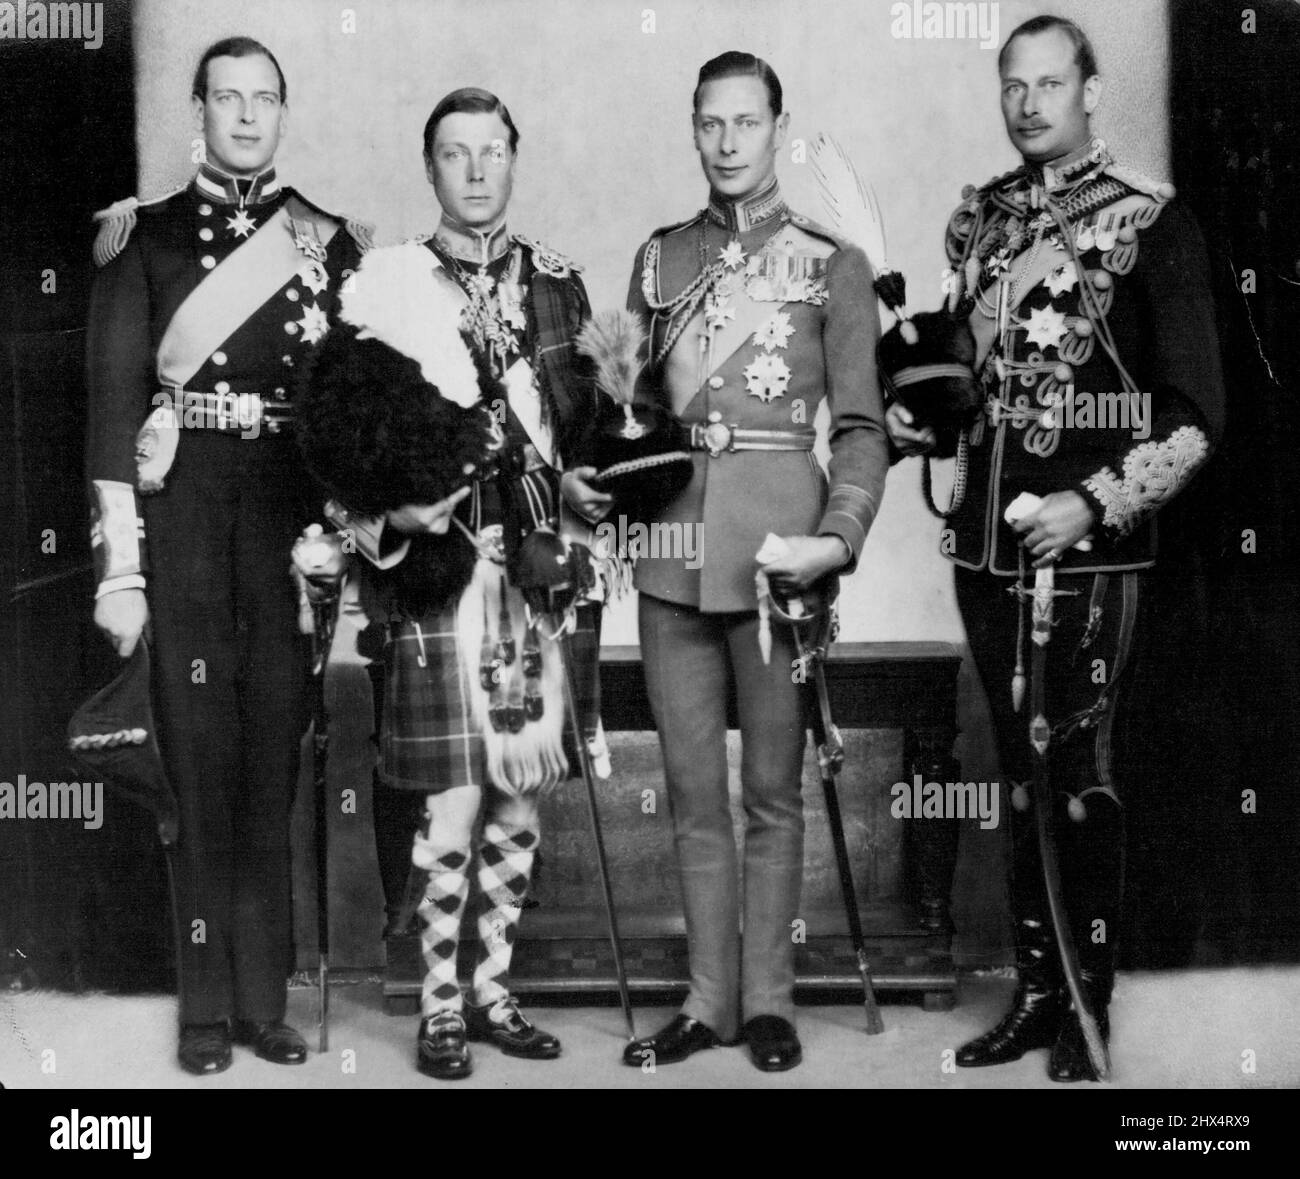 L to R: Prince George, Prince of Wales, Duke of York, Duke of Gloucester. June 19, 1933. Stock Photo